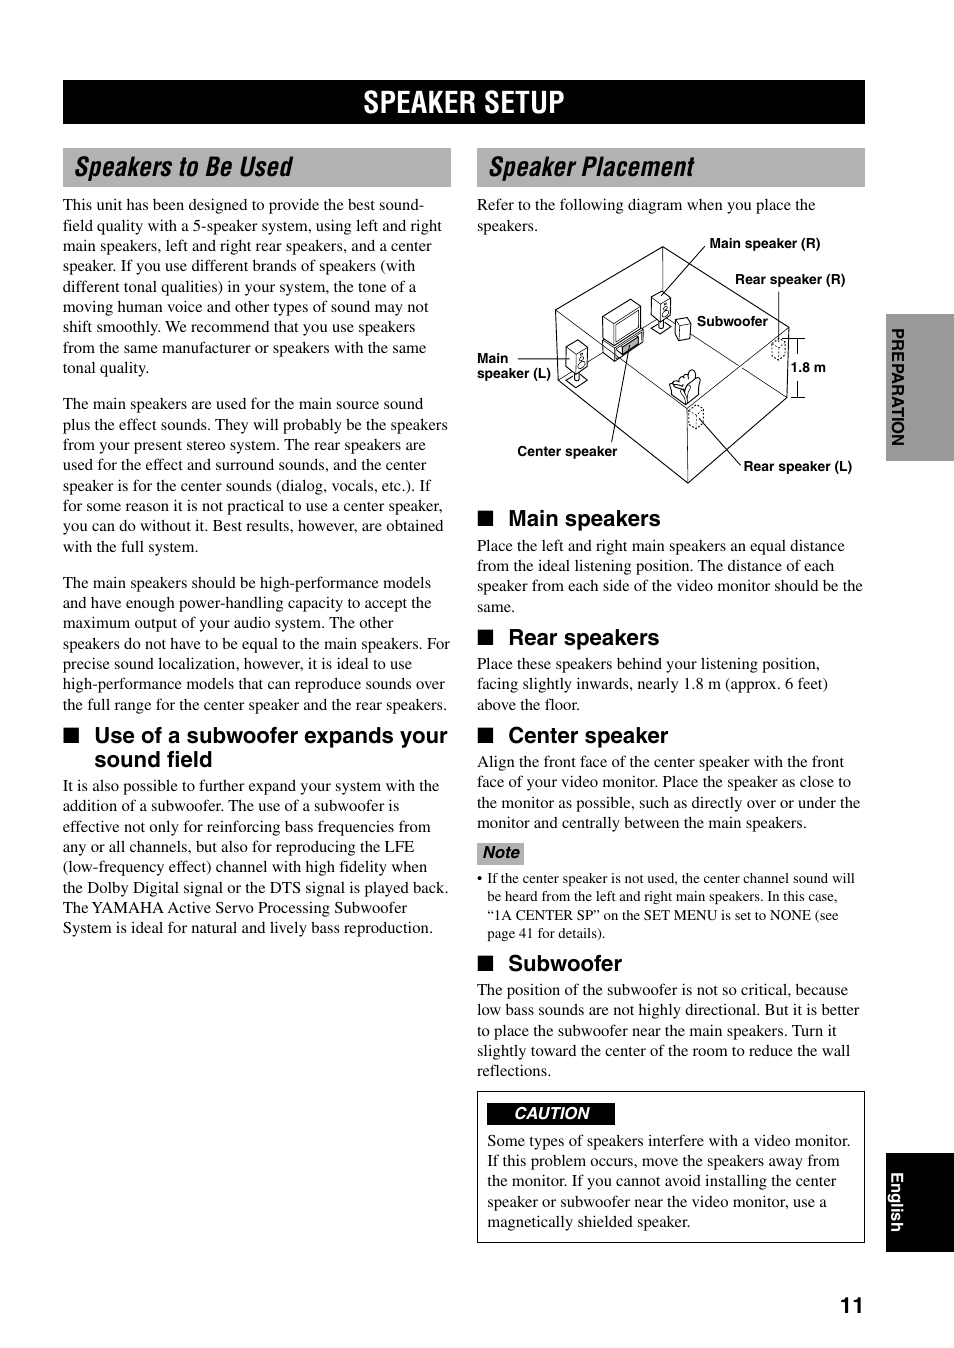 Preparation, Speaker setup, Speakers to be used | Speaker placement, Use of a subwoofer expands your sound field, Main speakers, Rear speakers, Center speaker, Subwoofer | Yamaha RX-V800RDS User Manual | Page 13 / 83